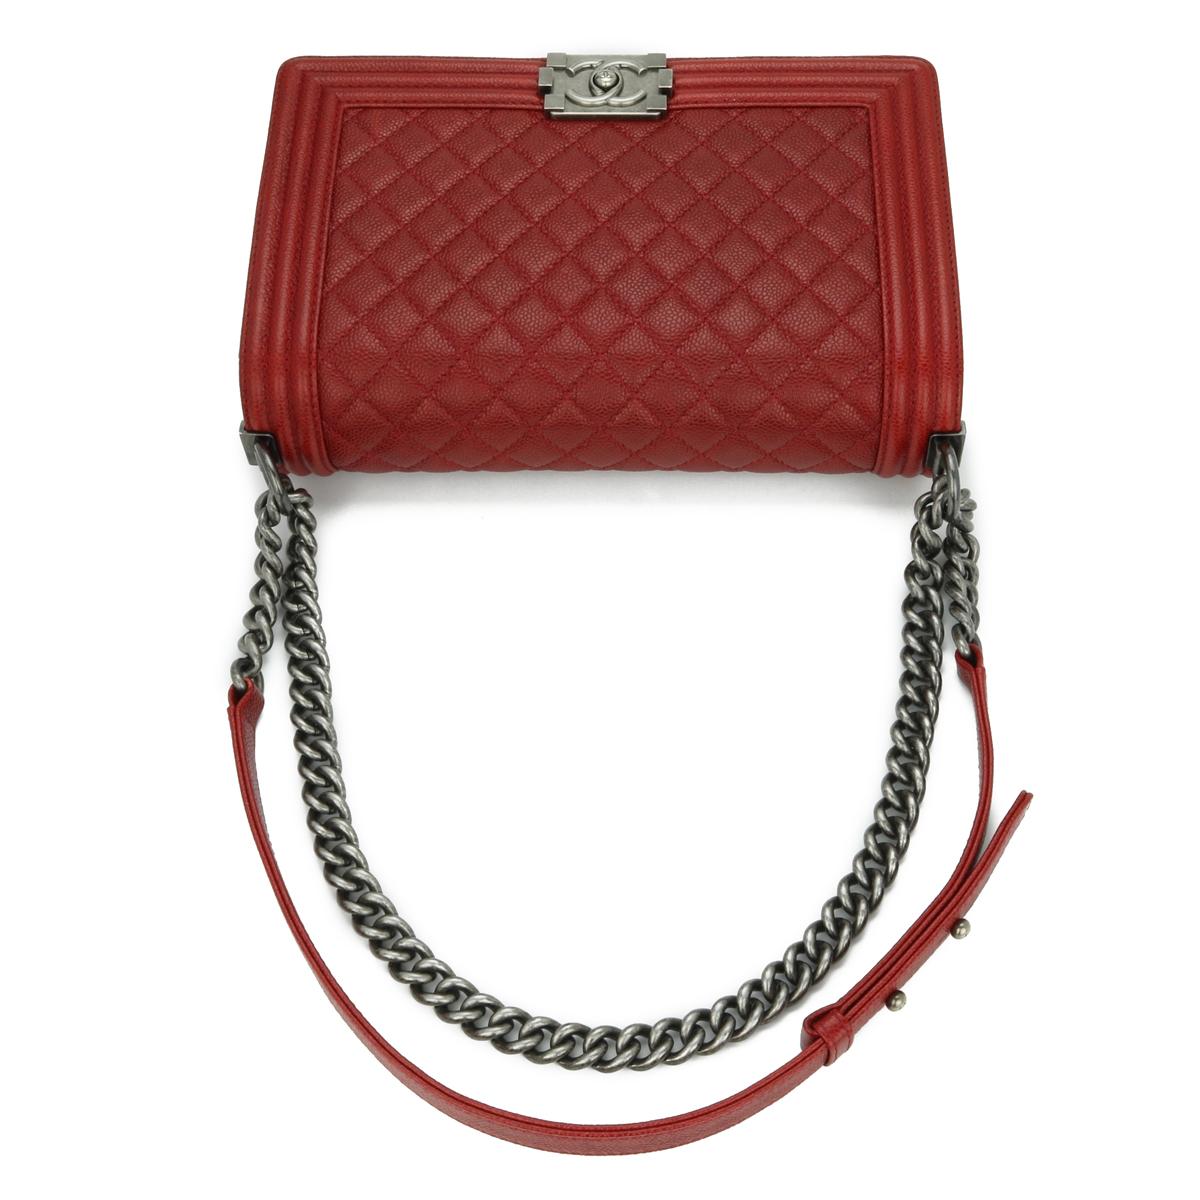 CHANEL New Medium Quilted Boy Bag in Dark Red Caviar with Ruthenium Hardware 14B For Sale 7